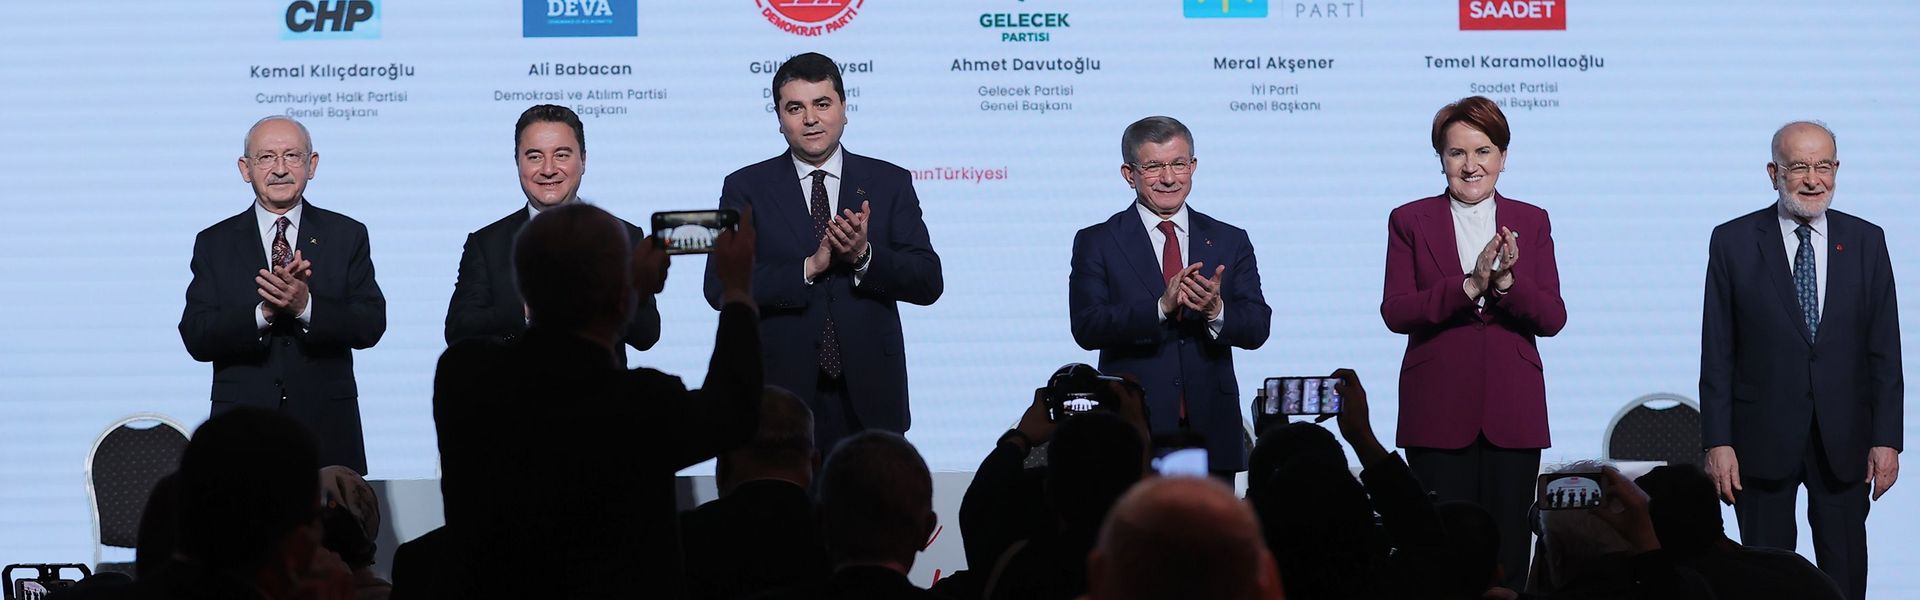 Six opposition party leaders' "Strengthened Parliamentary System" meeting in Ankara